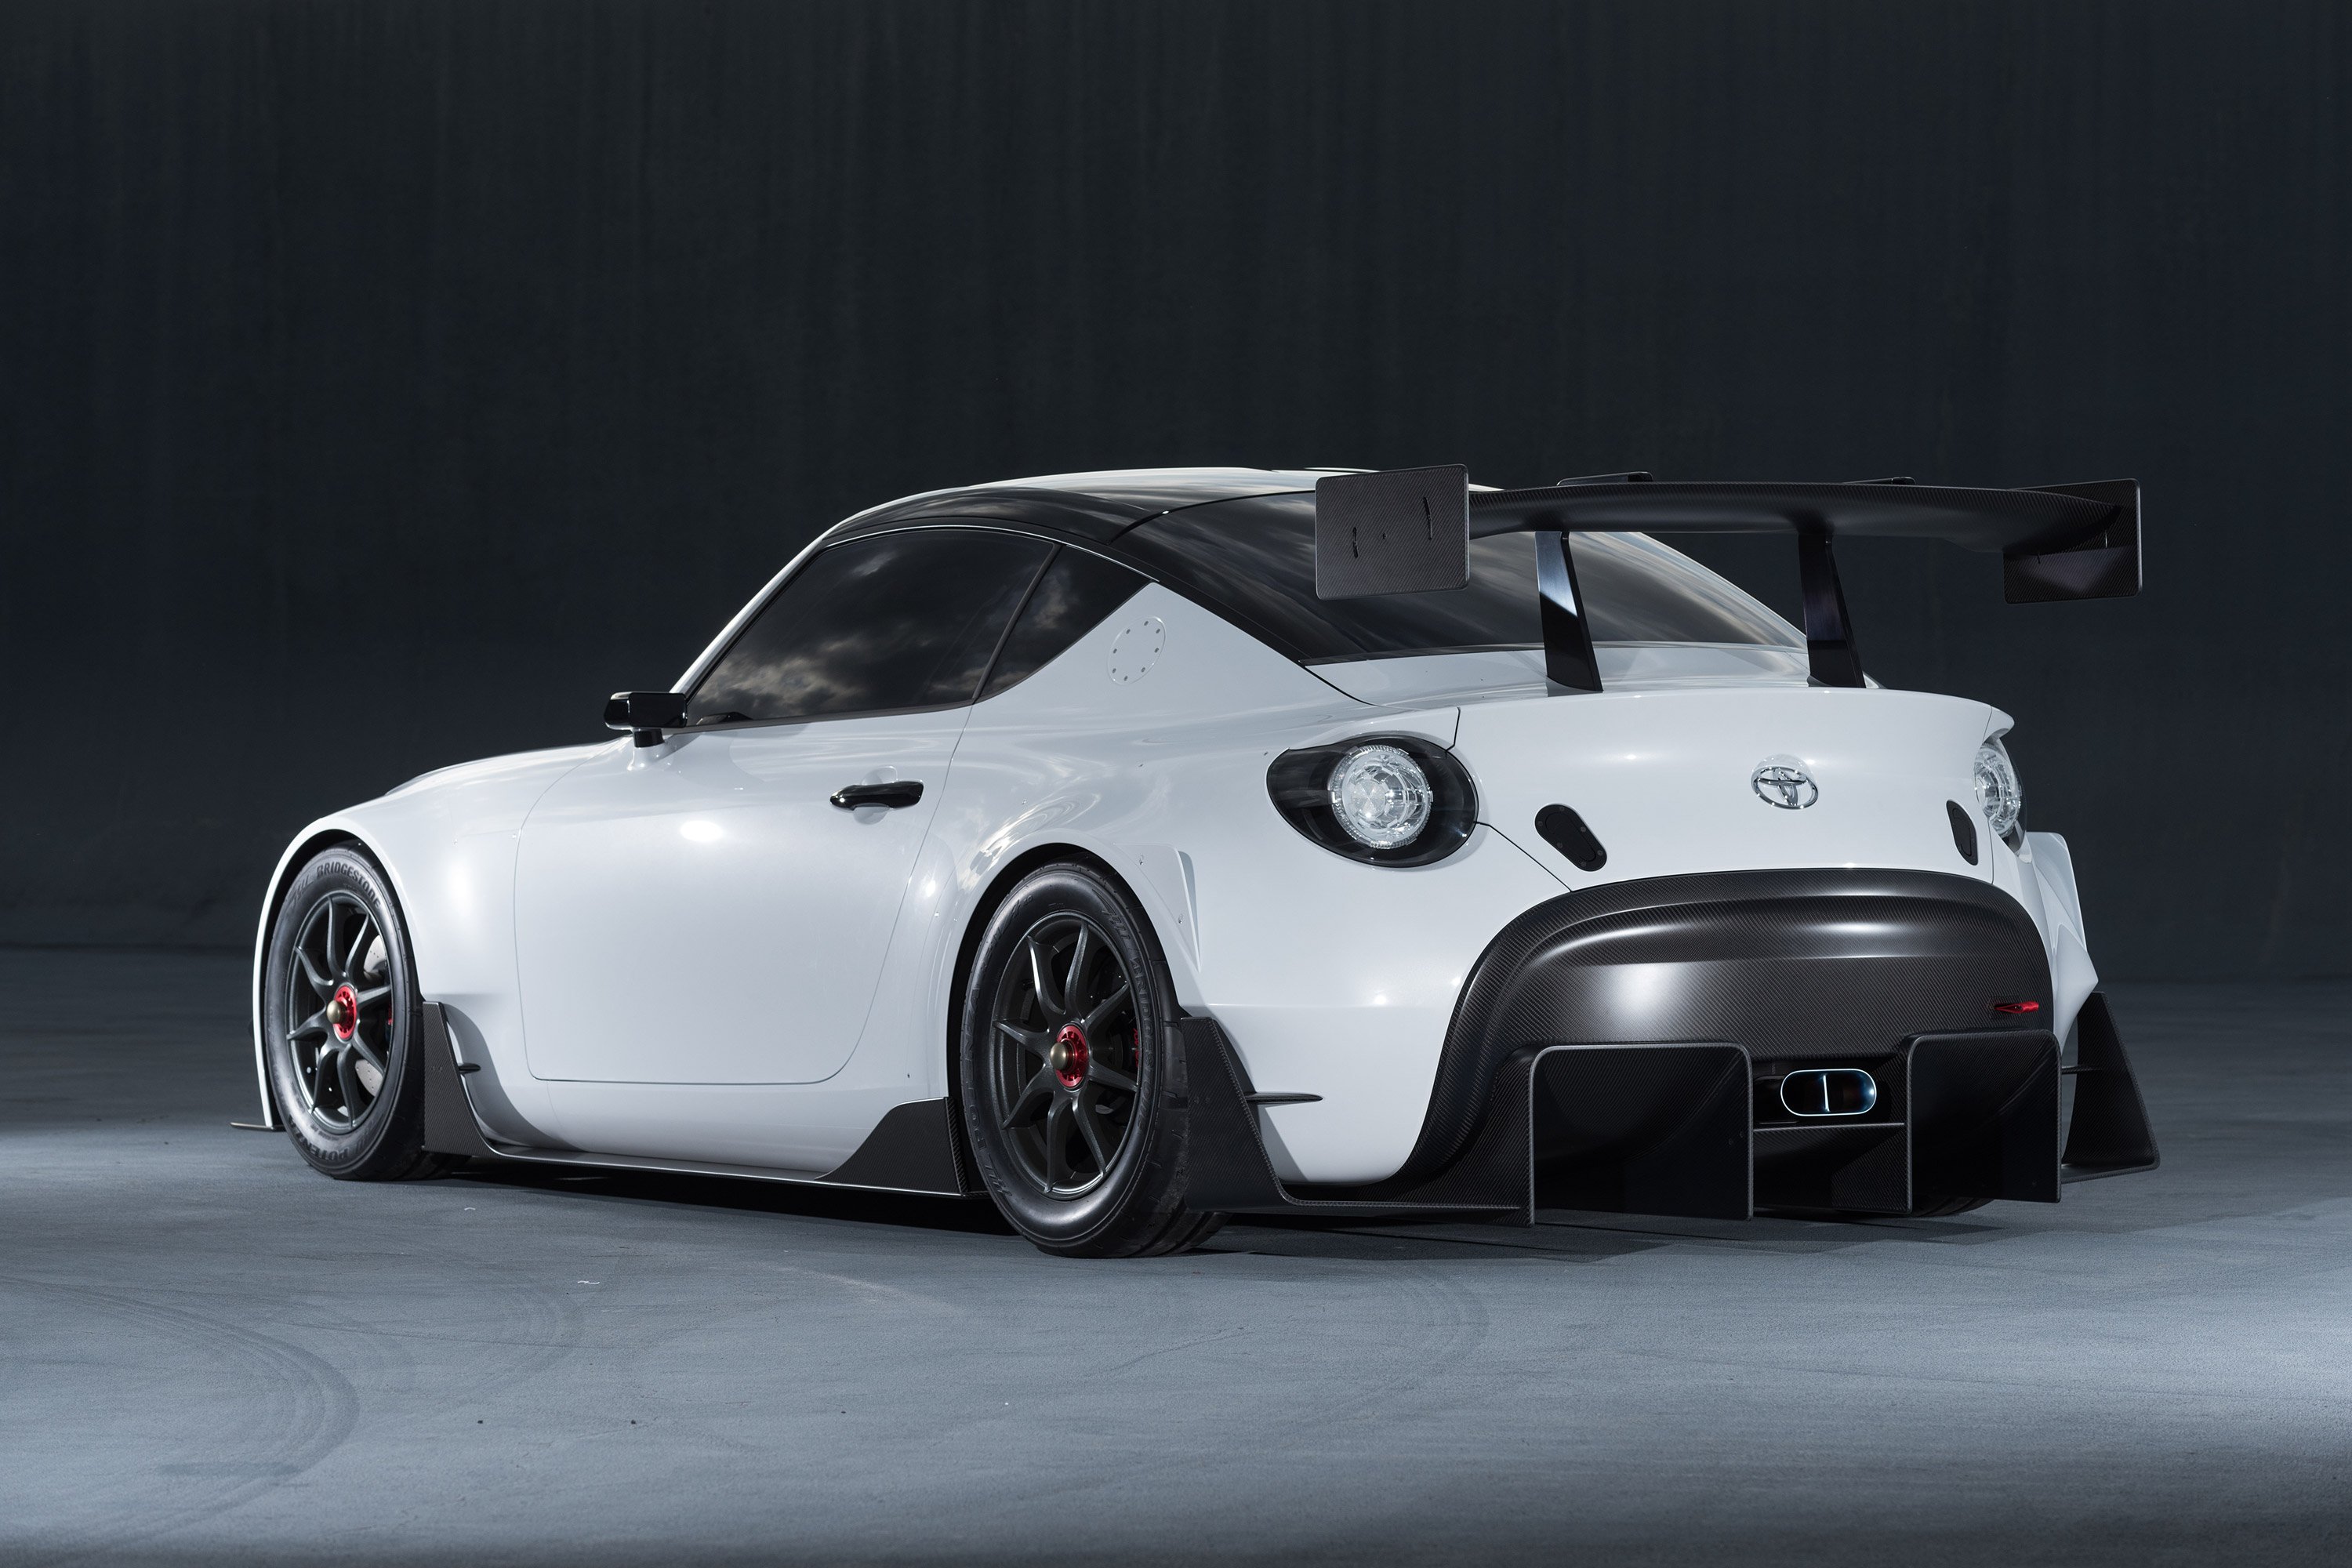 2016, Toyota, S fr, Racing, Concept, Race, Tuning Wallpaper